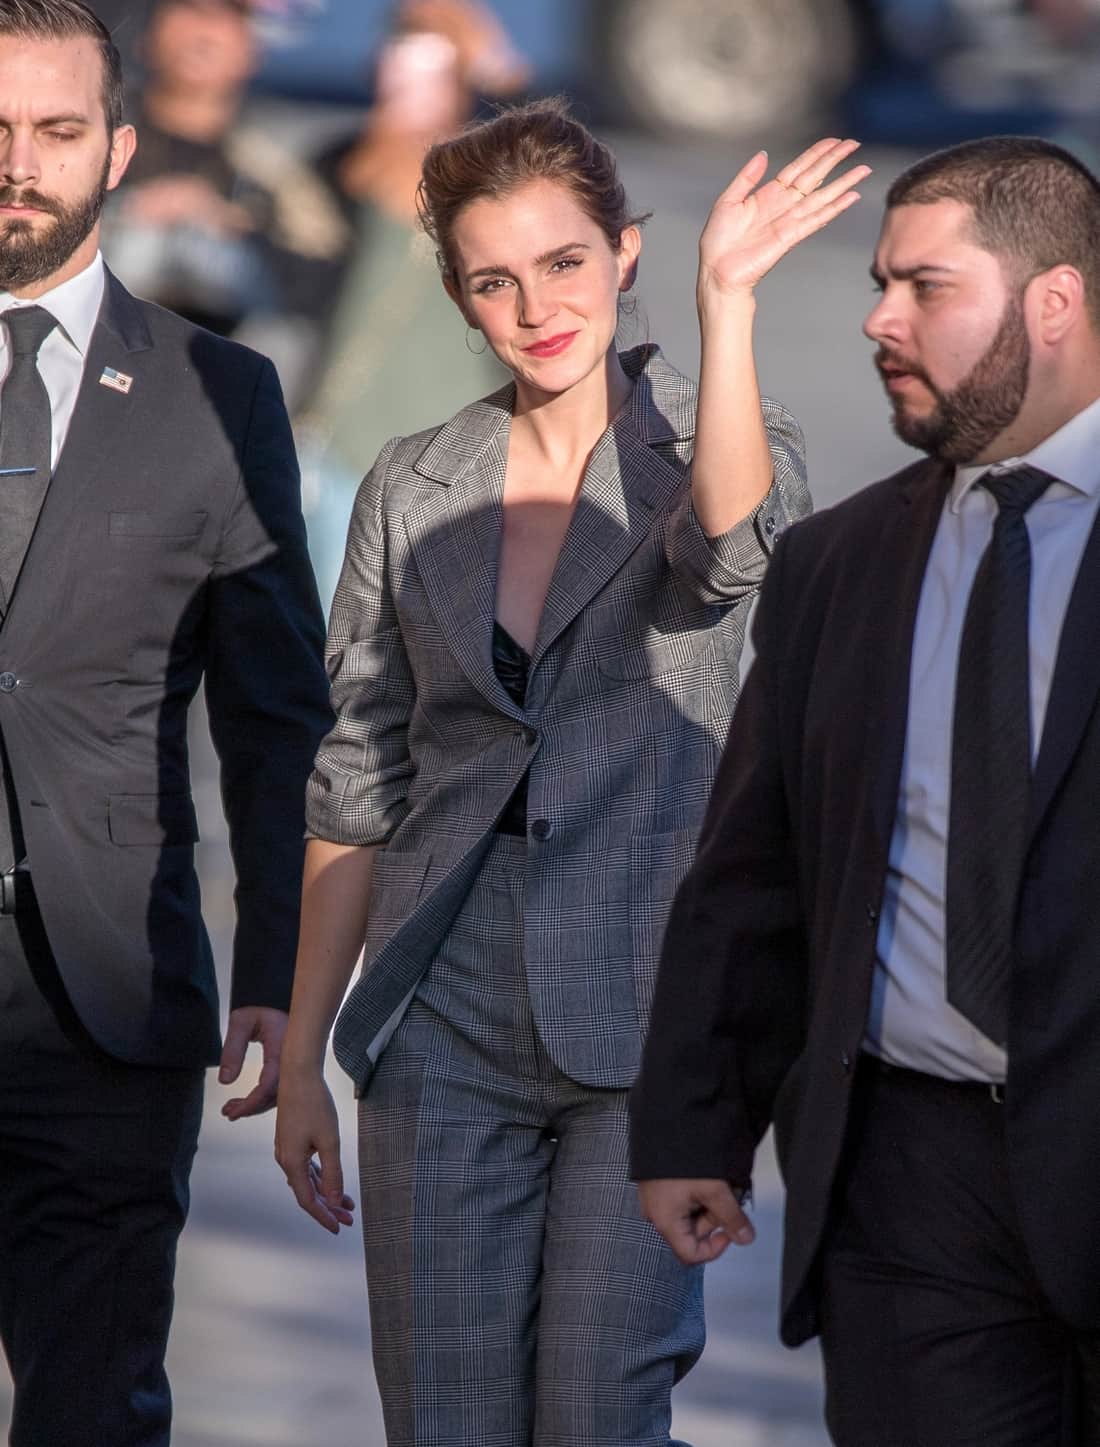 Emma Watson Looked Incredible in a Gray Plaid Pantsuit at Jimmy Kimmel Live!